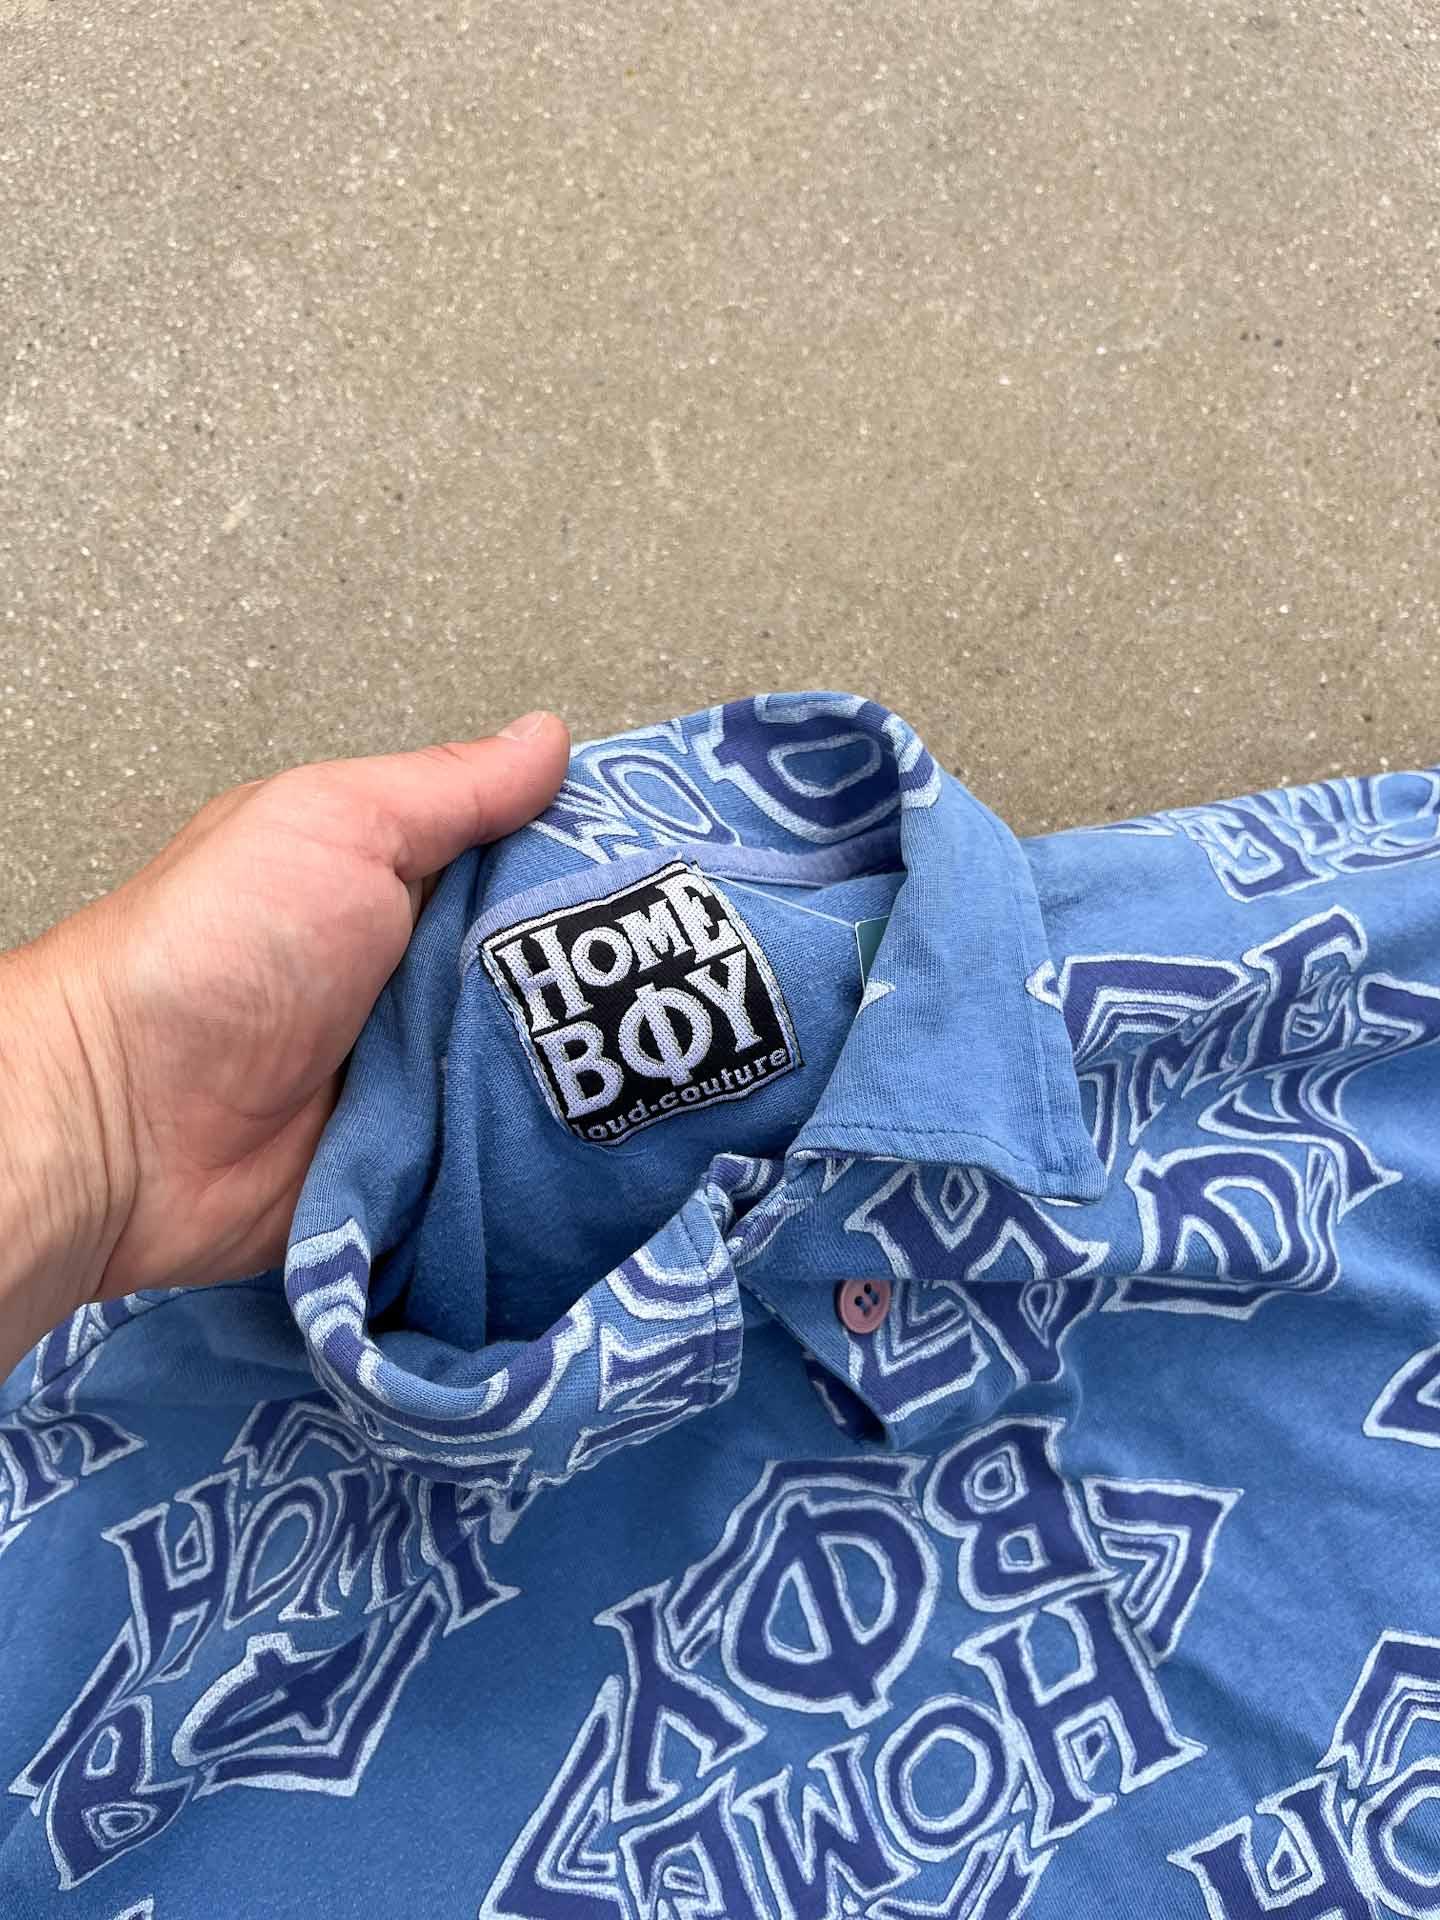 Homeboy loud couture full over printed - secondvintage